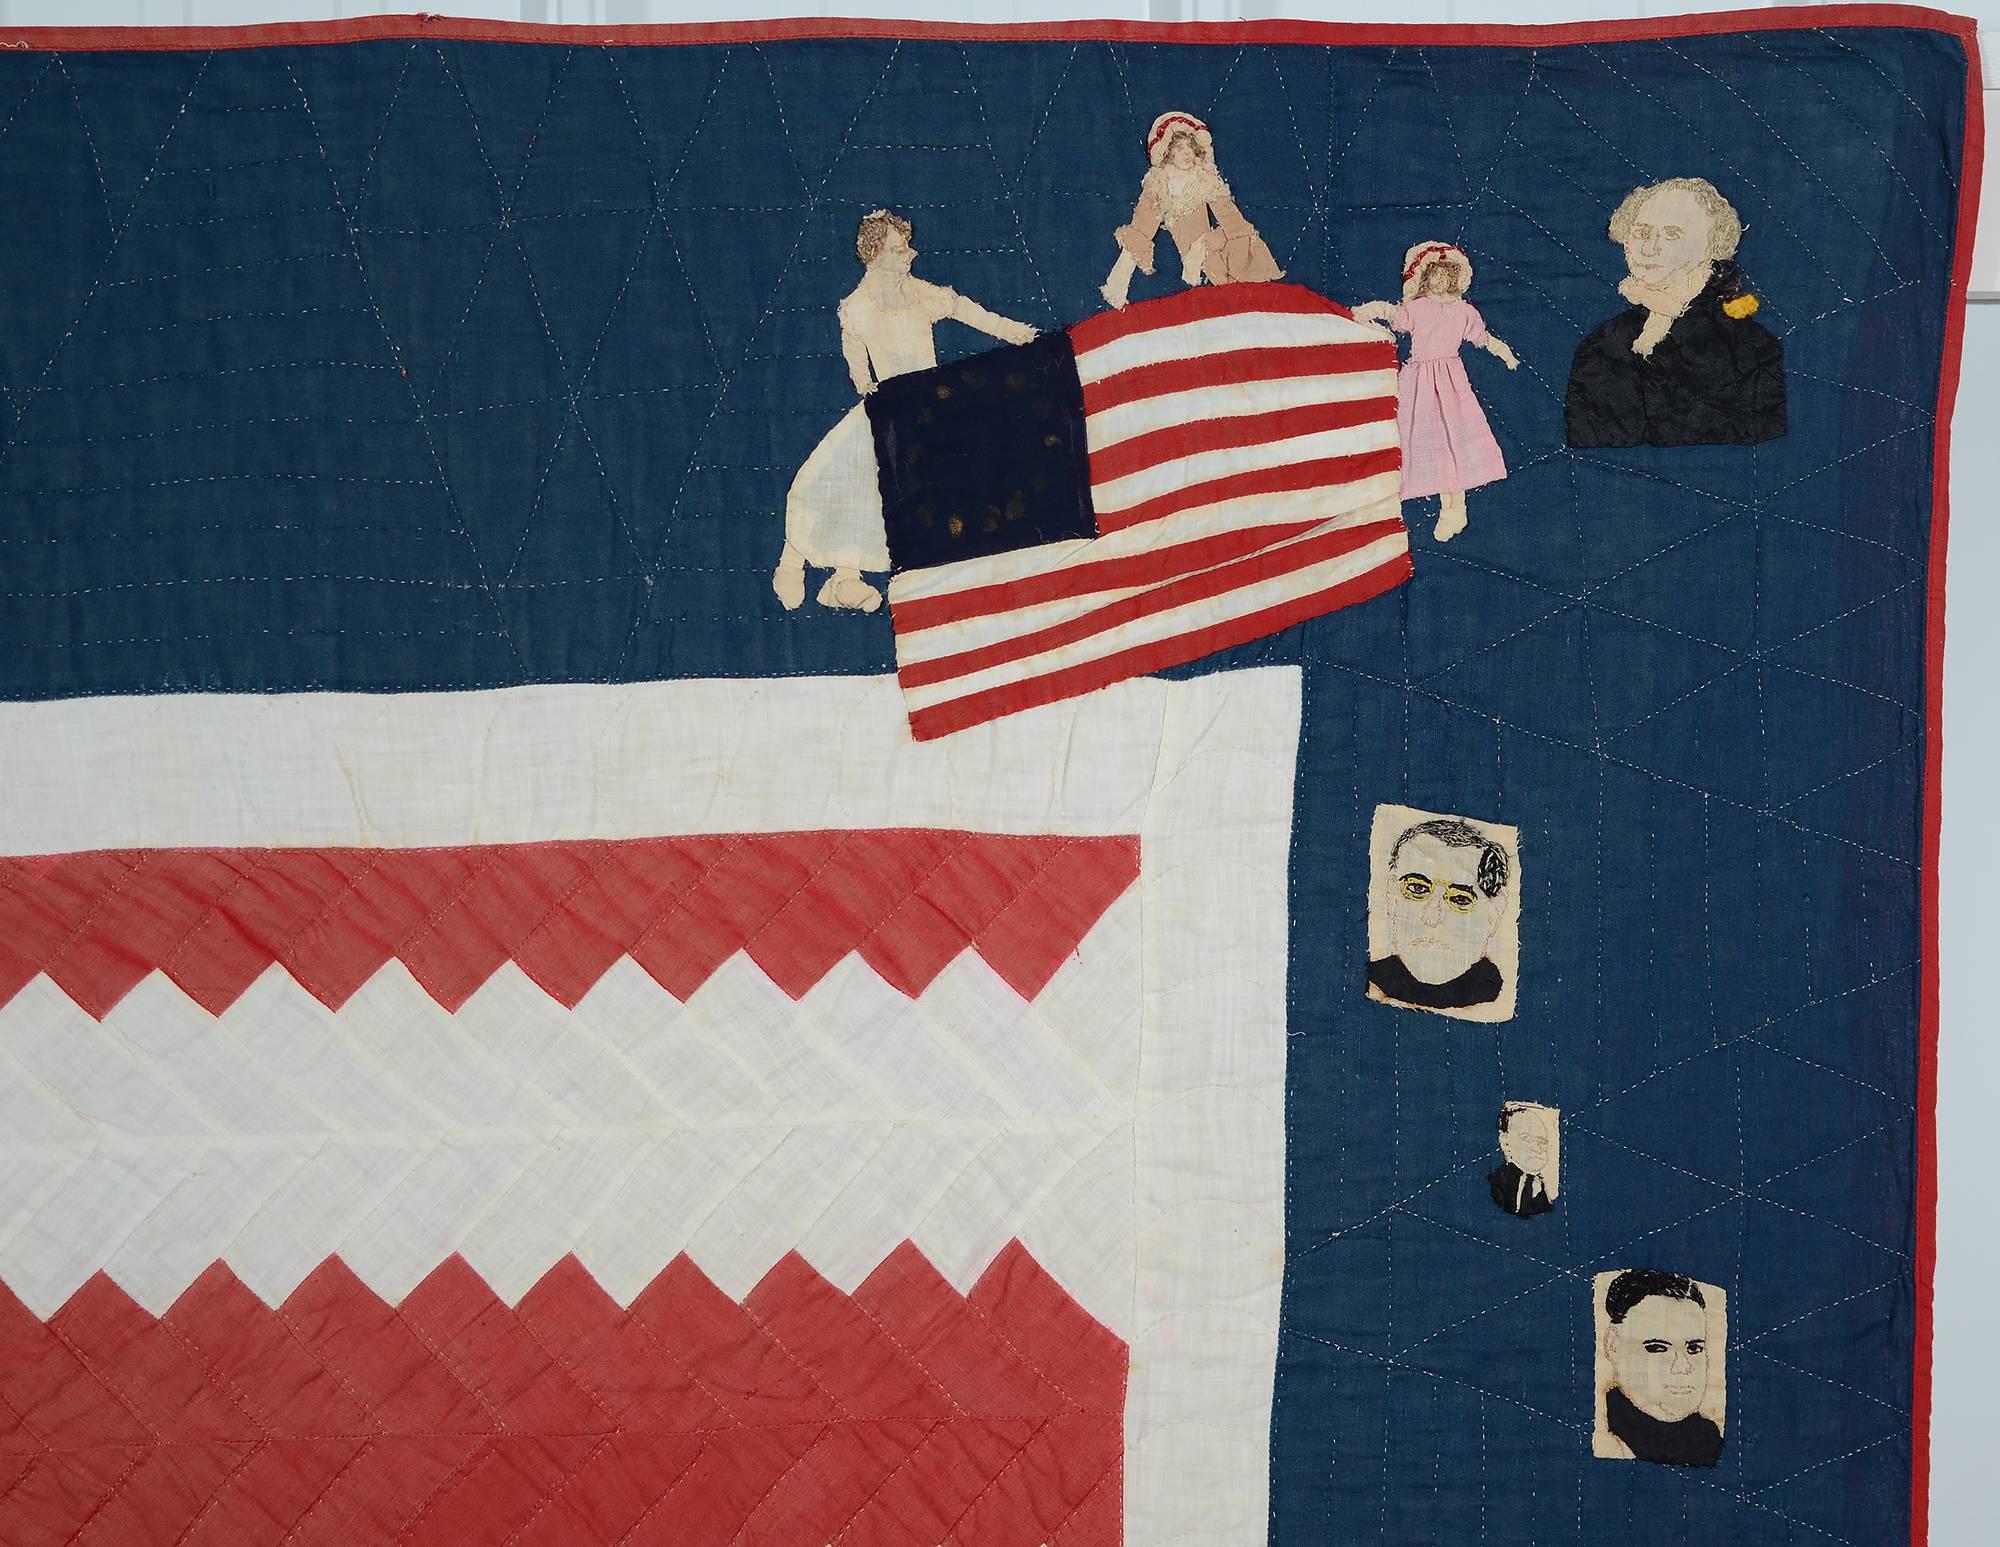 This fabulous 48 star Patriotic quilt has the embroidered title 